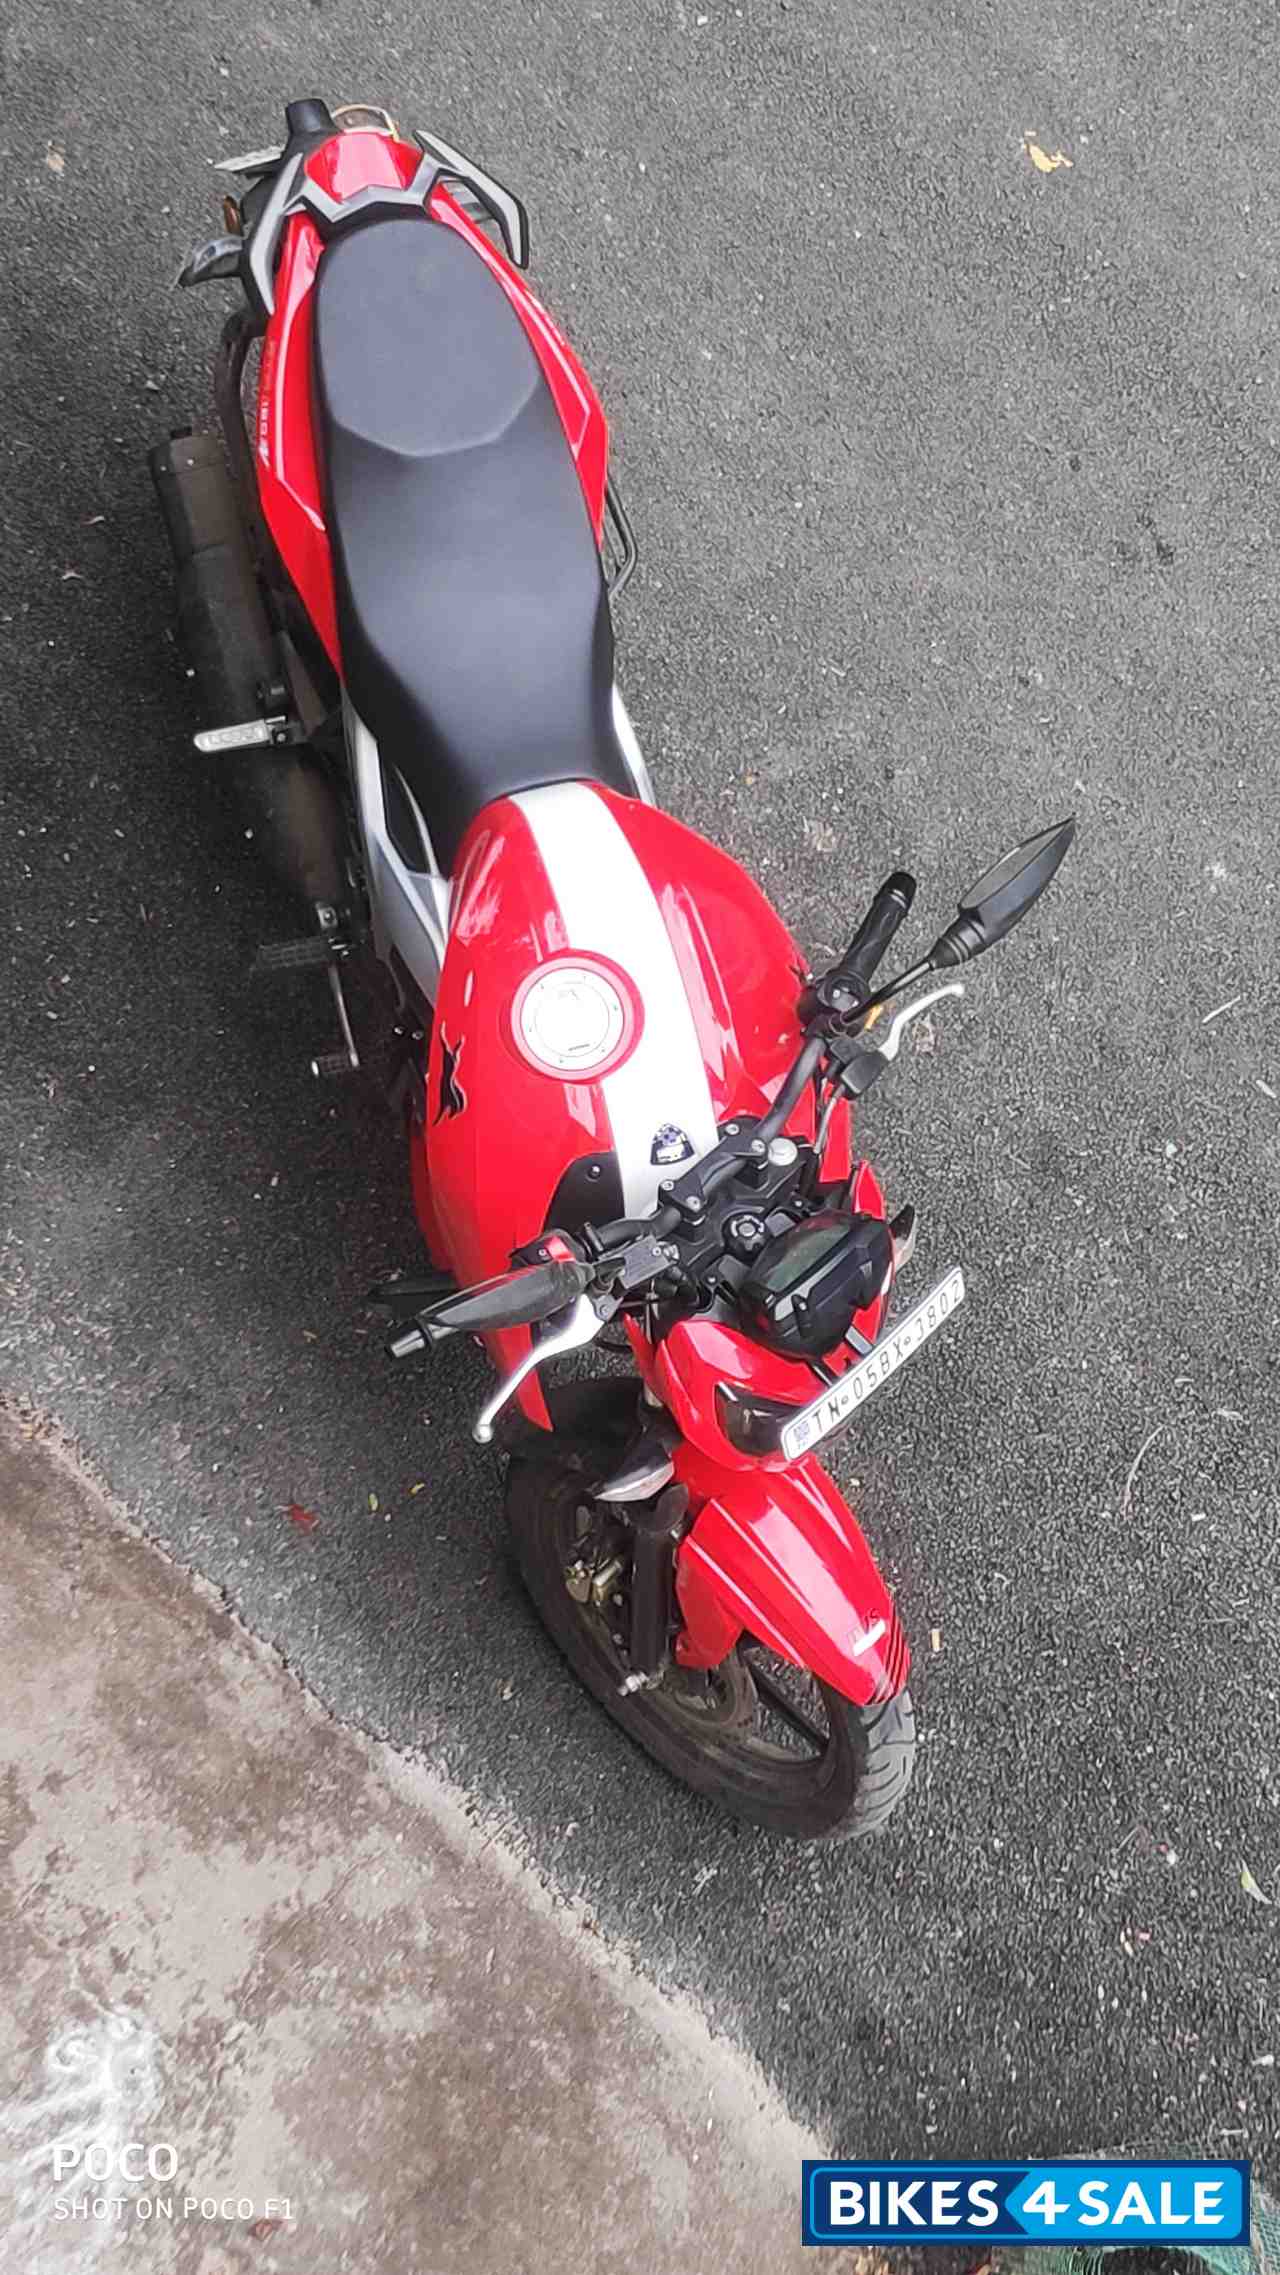 Used 2019 Model Tvs Apache Rtr 160 4v For Sale In Chennai Id 256514 Bikes4sale